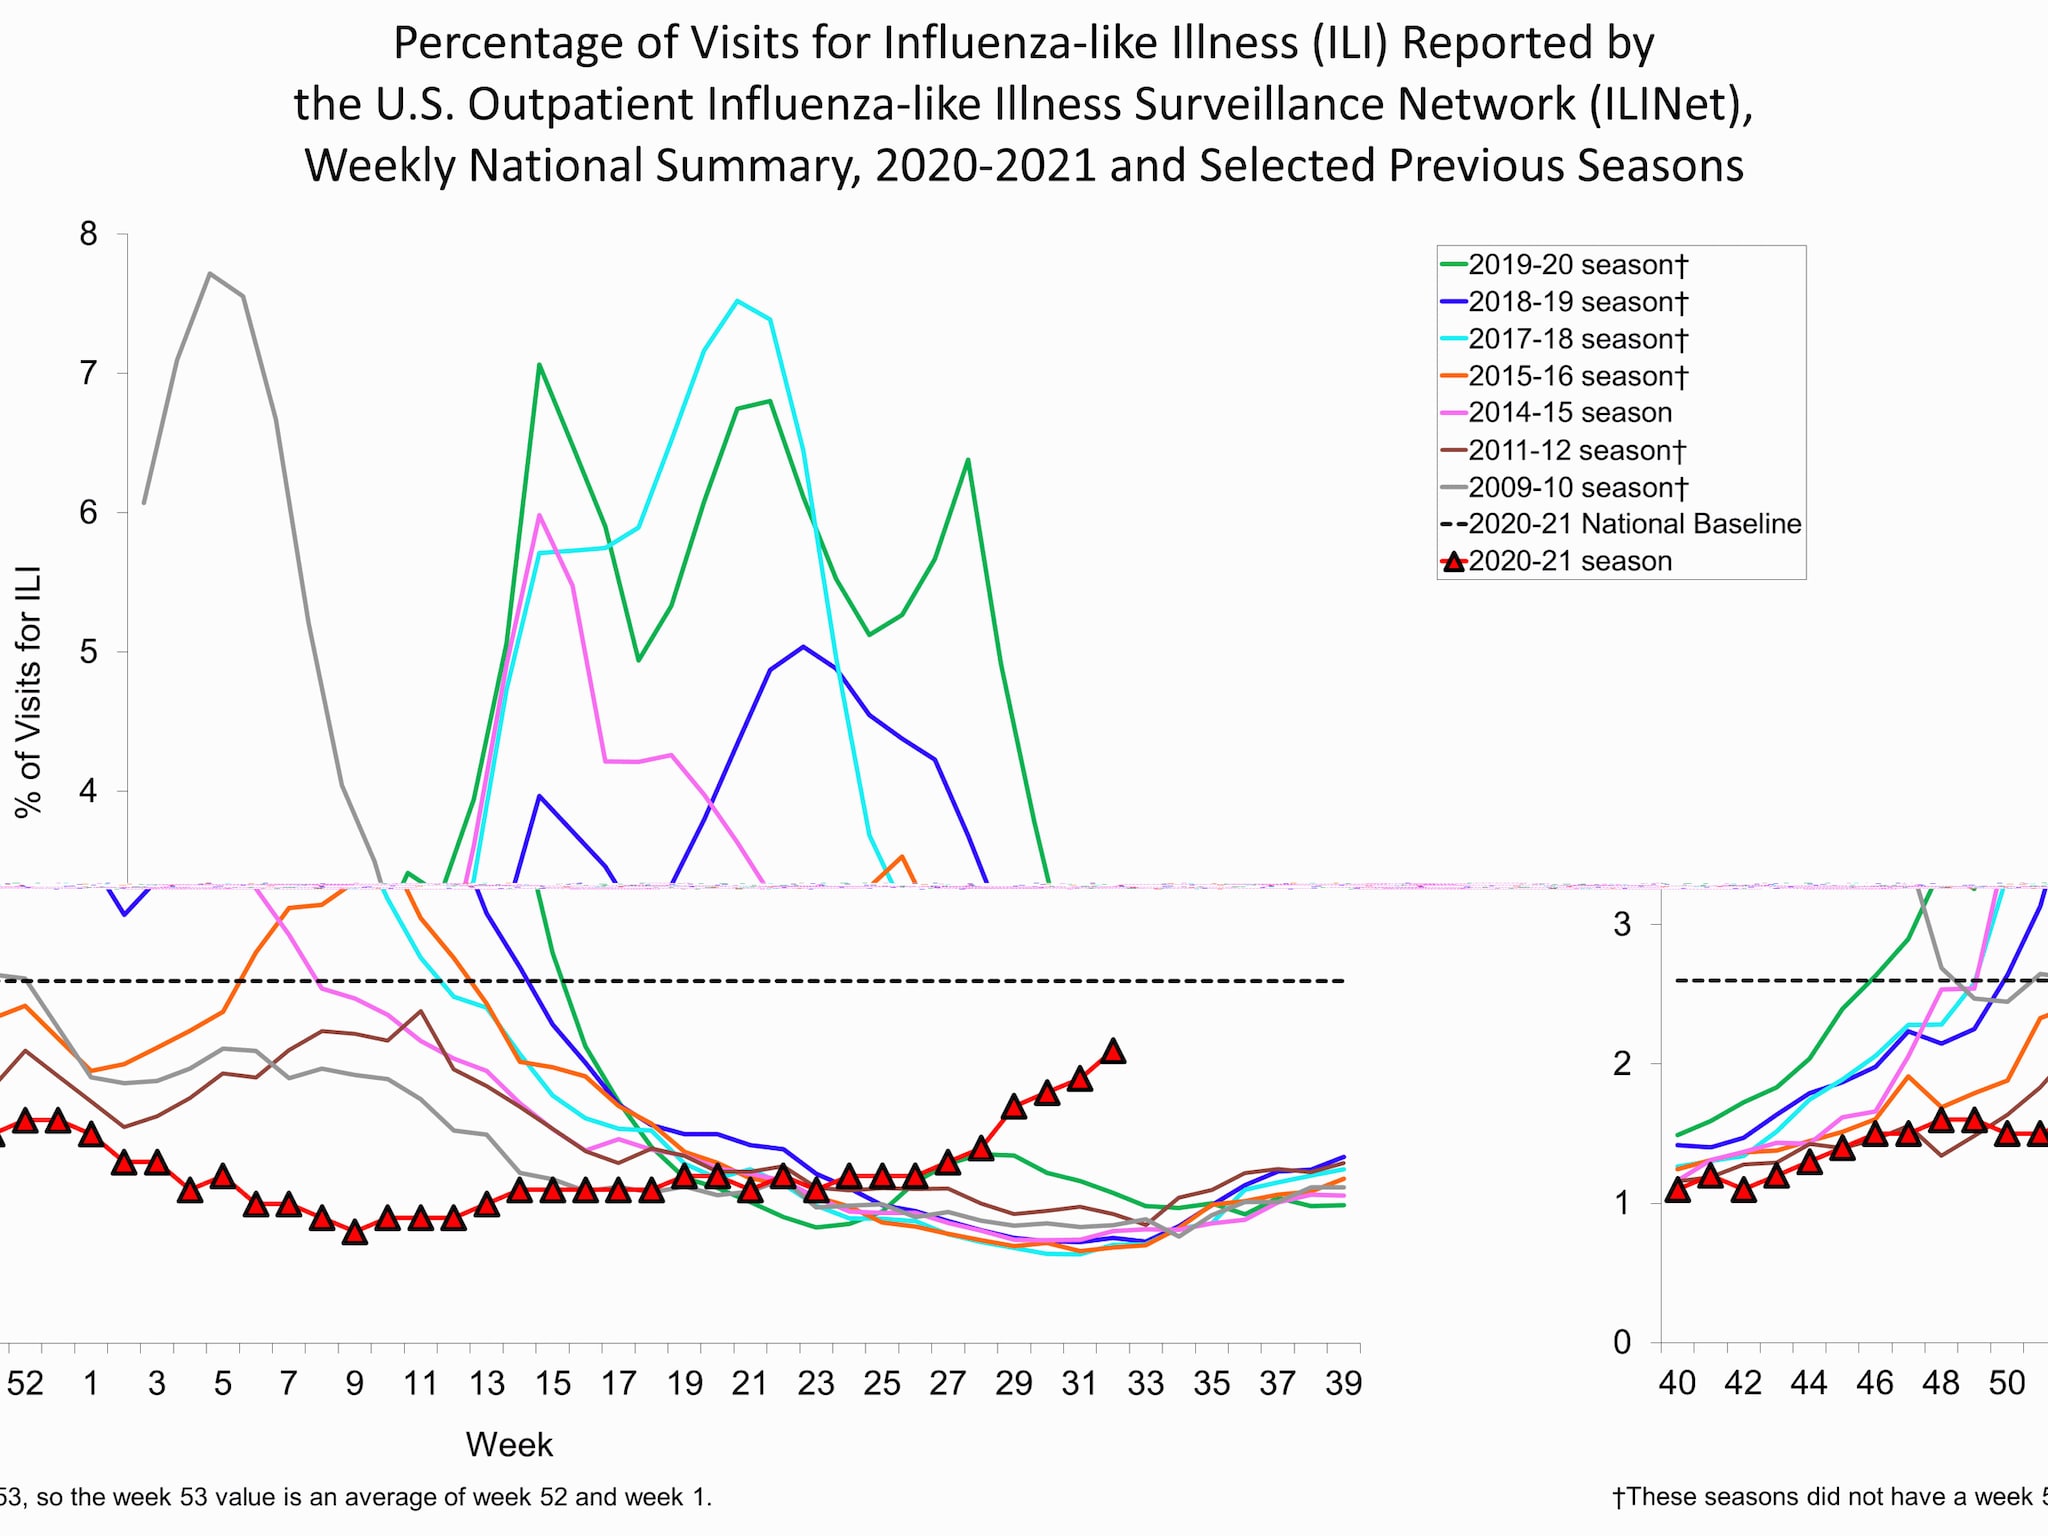 Percent of Visits for Influenza-like Illness (ILI) Reported by the U.S. Outpatient influenza-like Illness Network